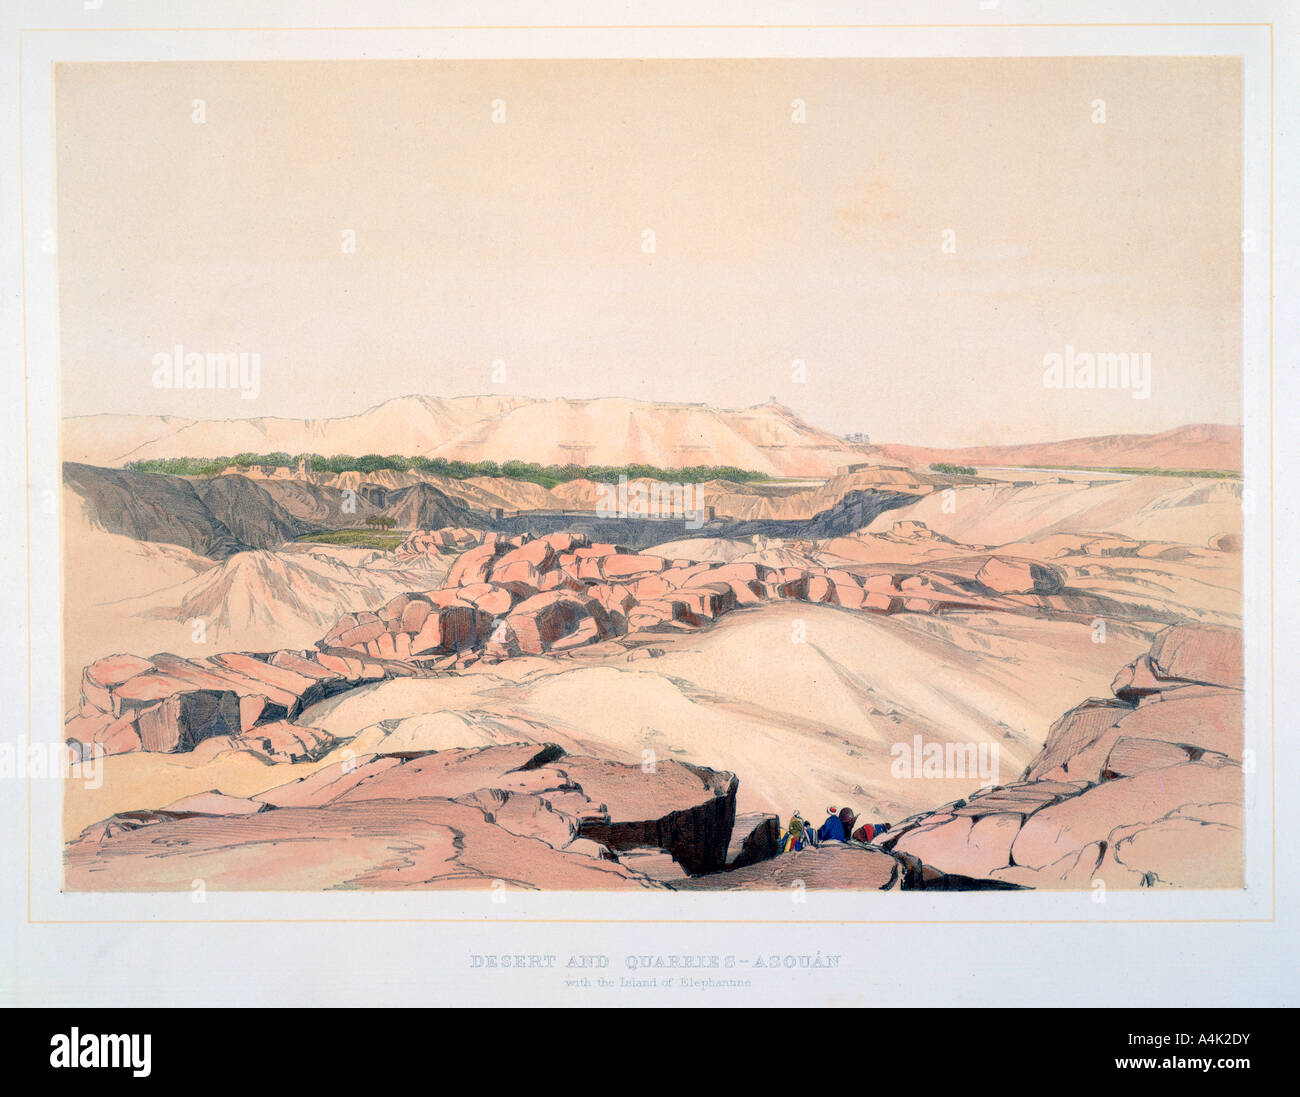 'Desert and Quarries, Asouan, with the Island of Elephantine', Egypt, 19th century. Artist: Lord Wharncliffe Stock Photo